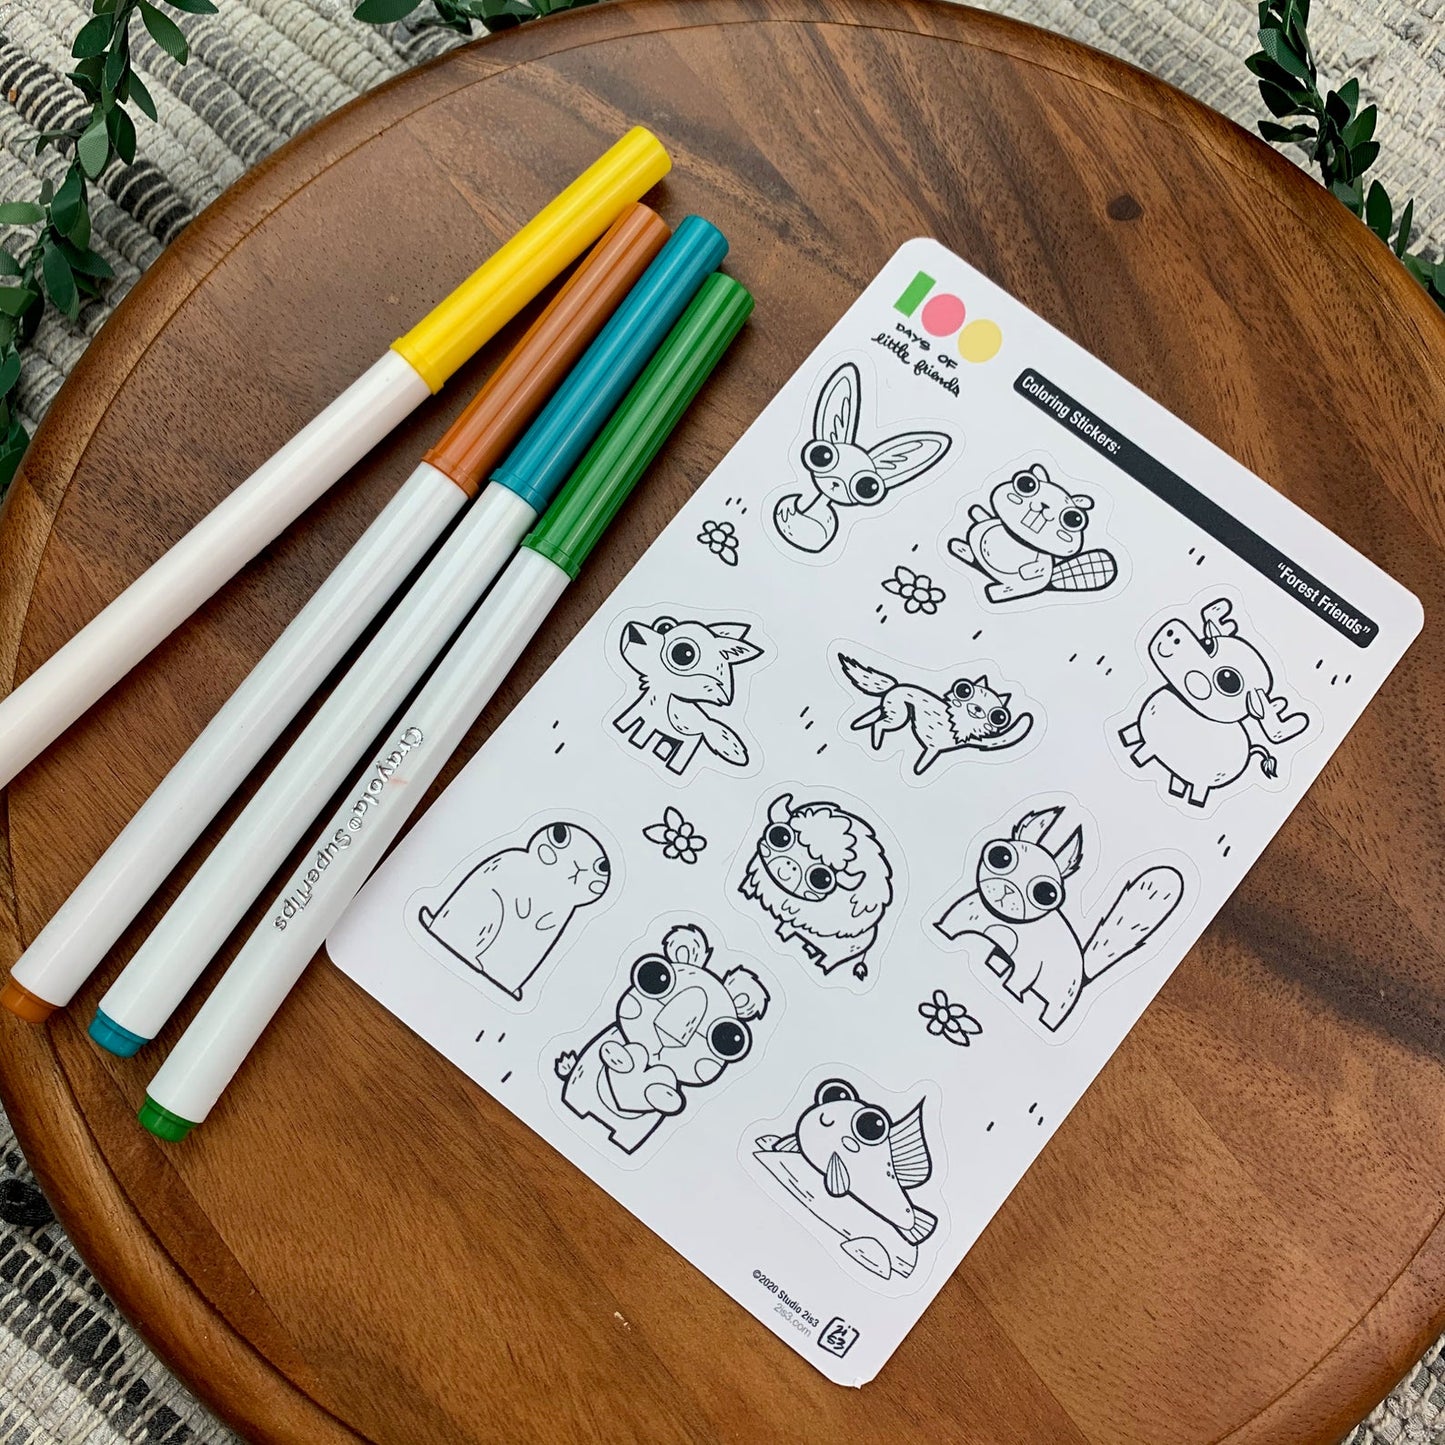 Markers and a sticker sheet with 10 little animal stickers on it. A Fox, Beaver, Moose, Wolf, Coyote, Bison, Squirrel, Prairie Dog, Bear, and Mudskipper.